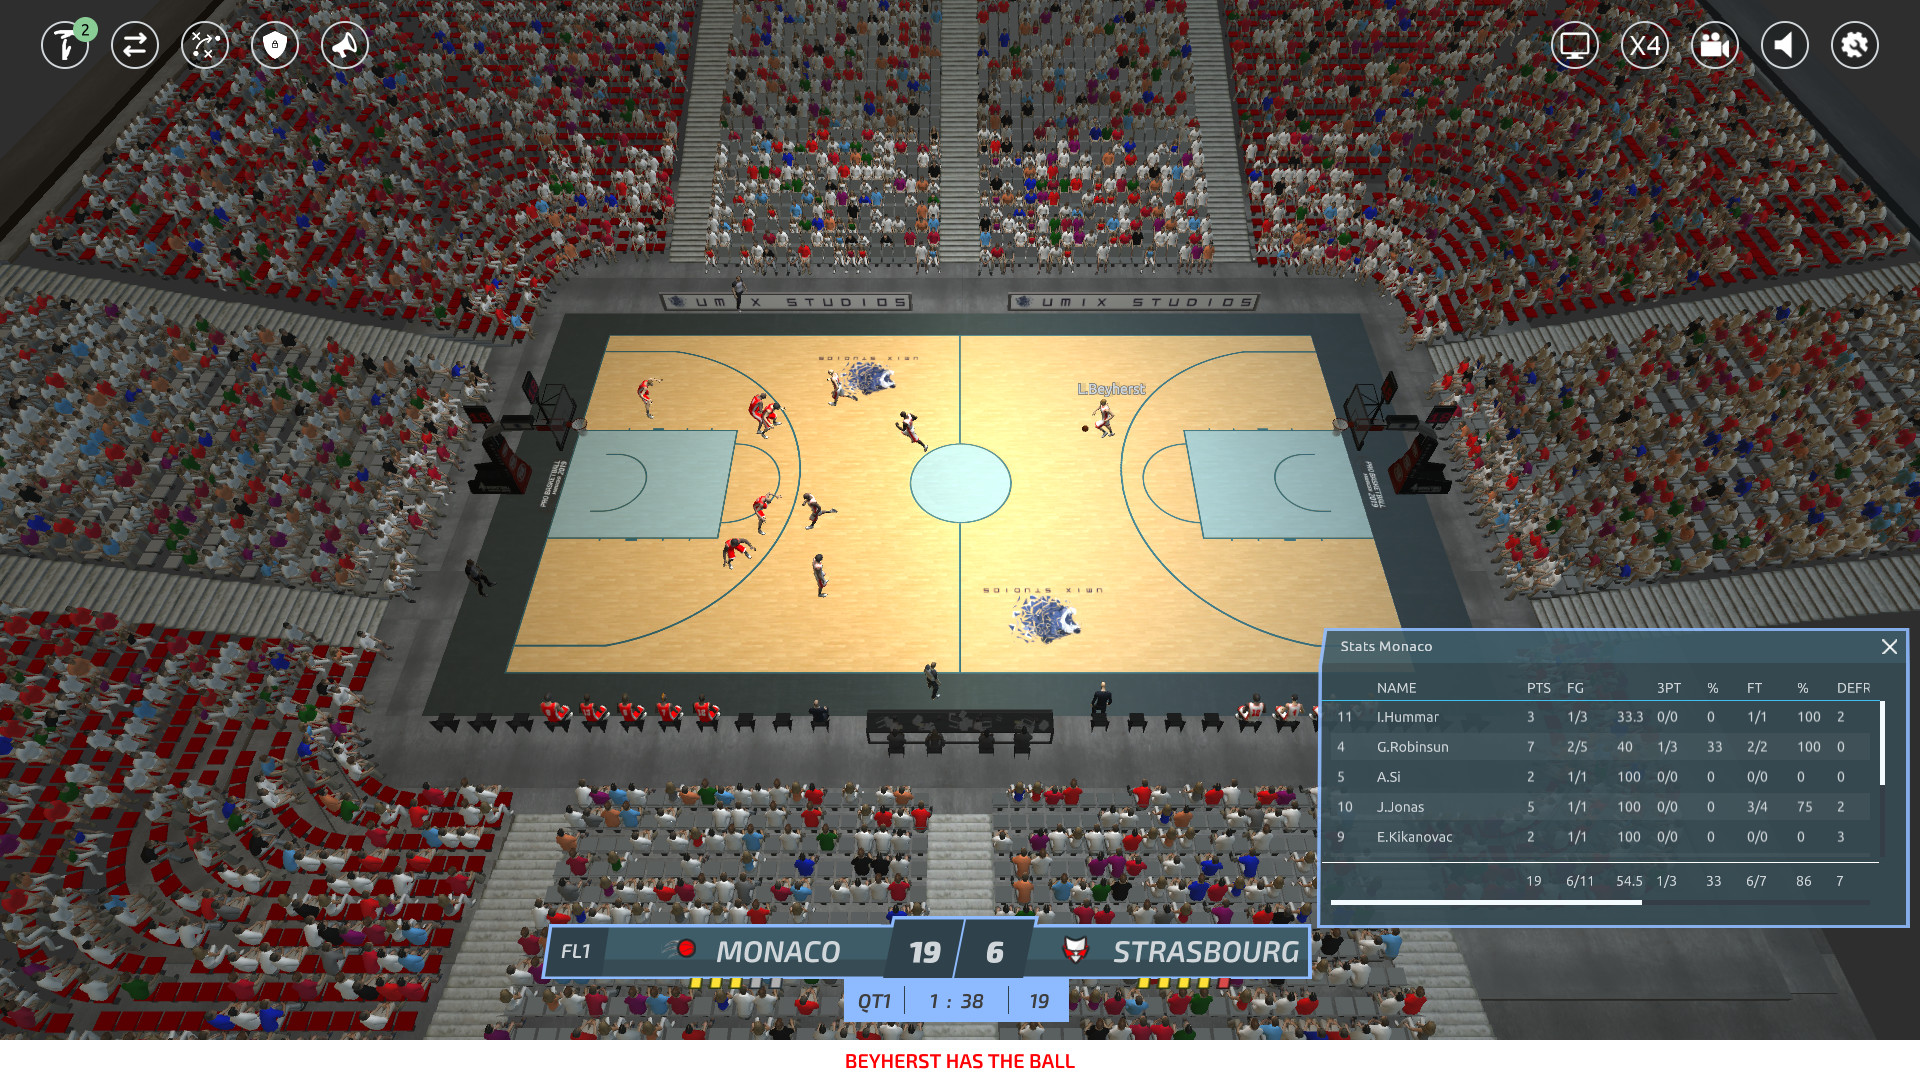 Pro Basketball Manager 2019 on Steam